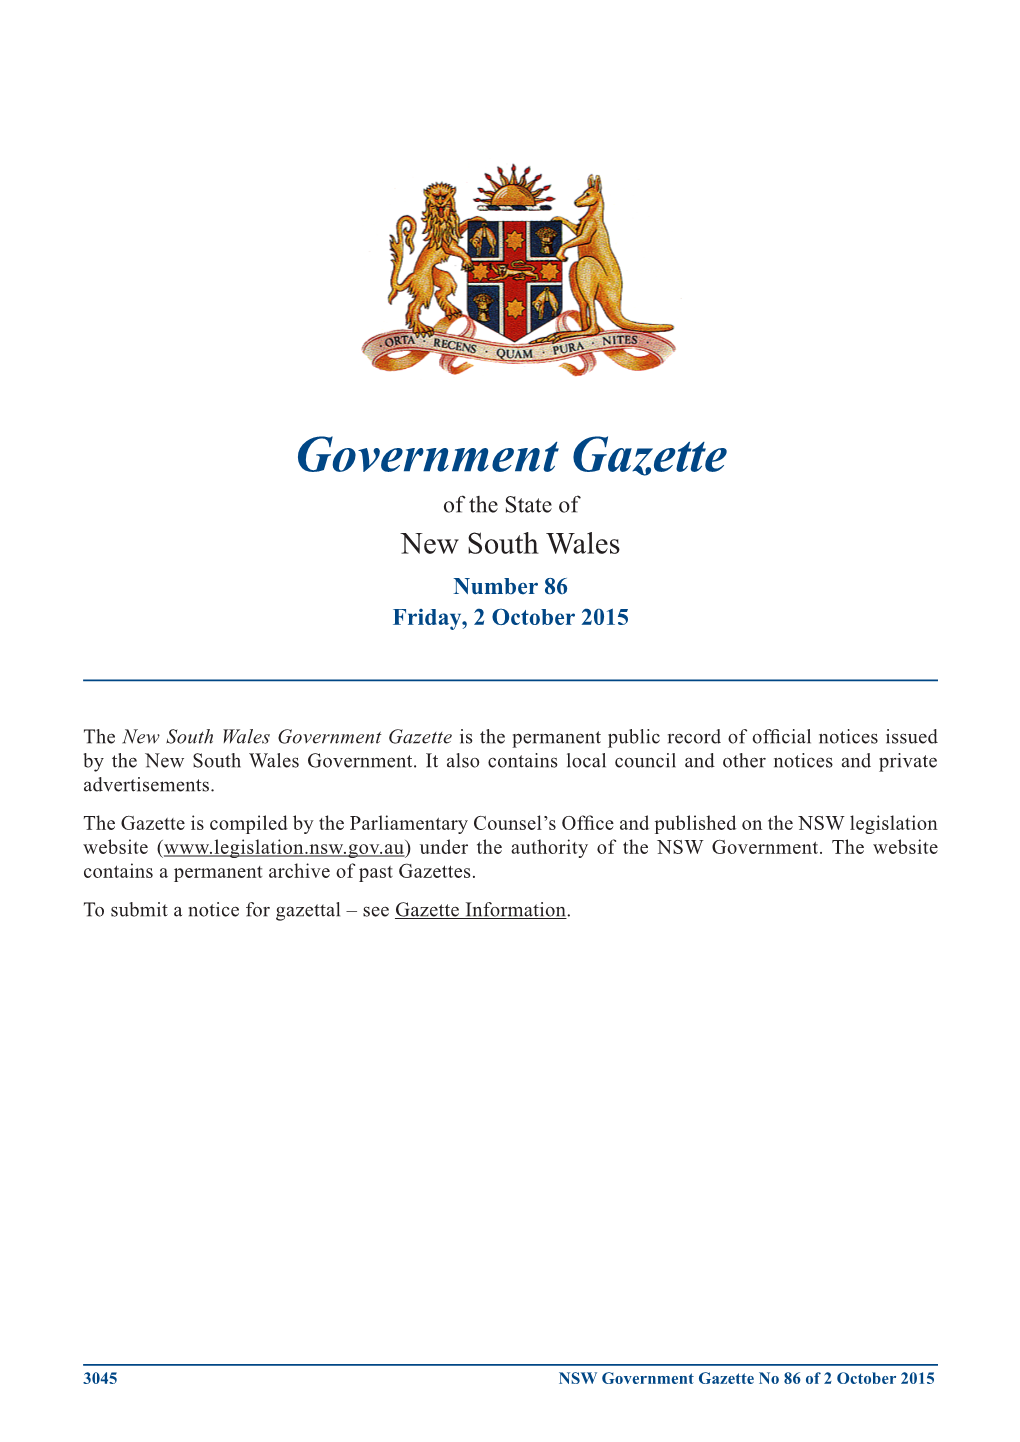 Government Gazette of the State of New South Wales Number 86 Friday, 2 October 2015